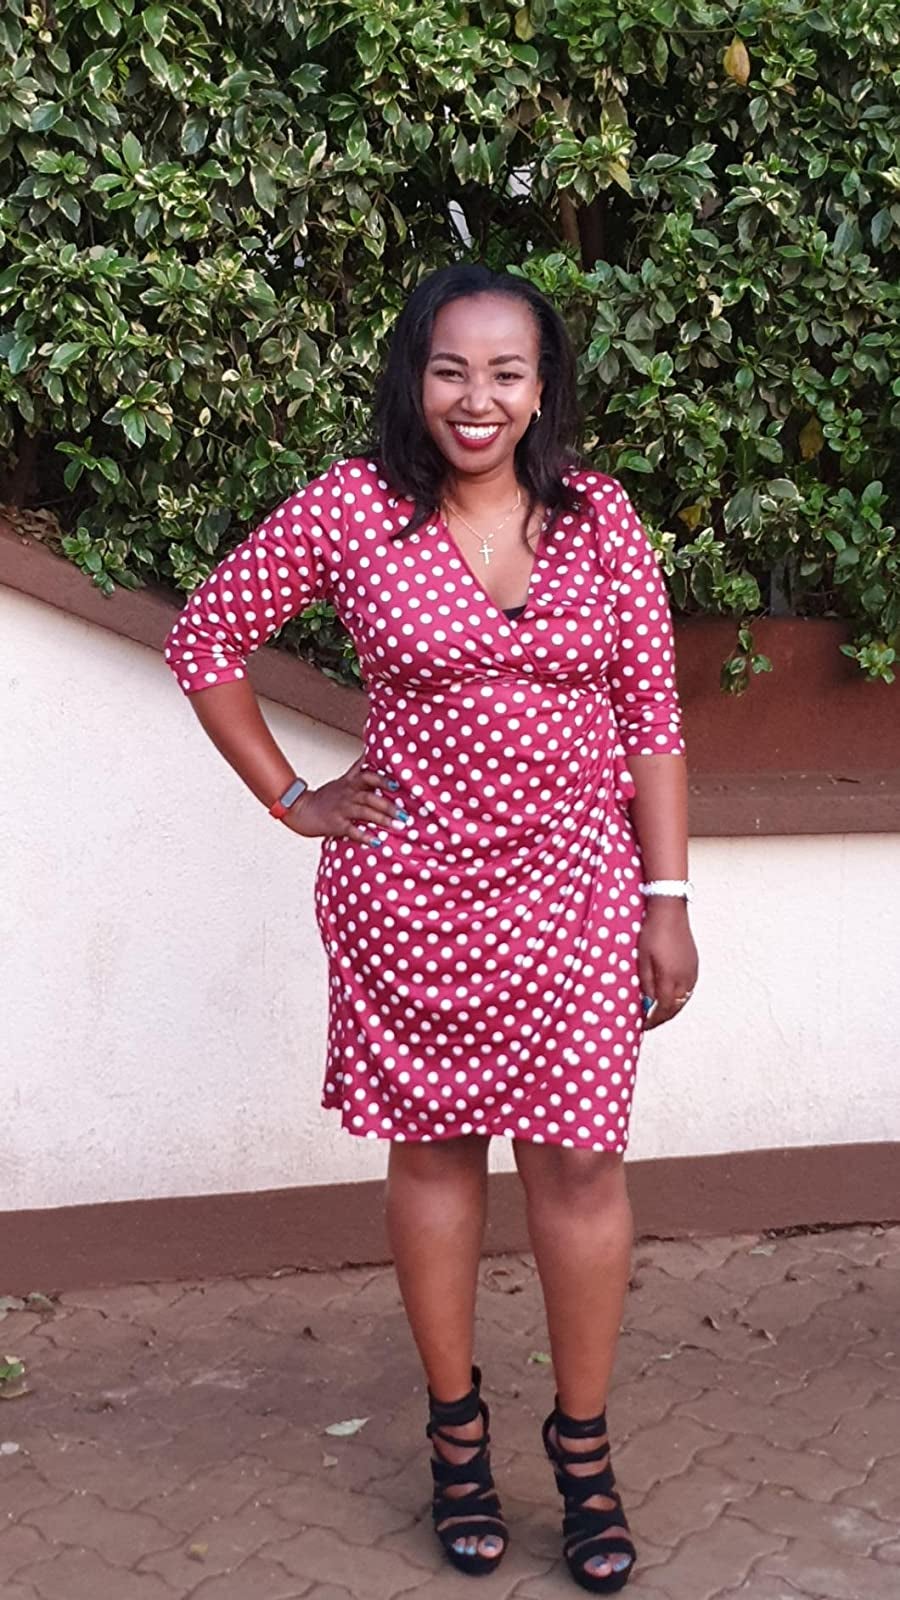 Reviewer is wearing the red short wrap dress with white polka dots throughout